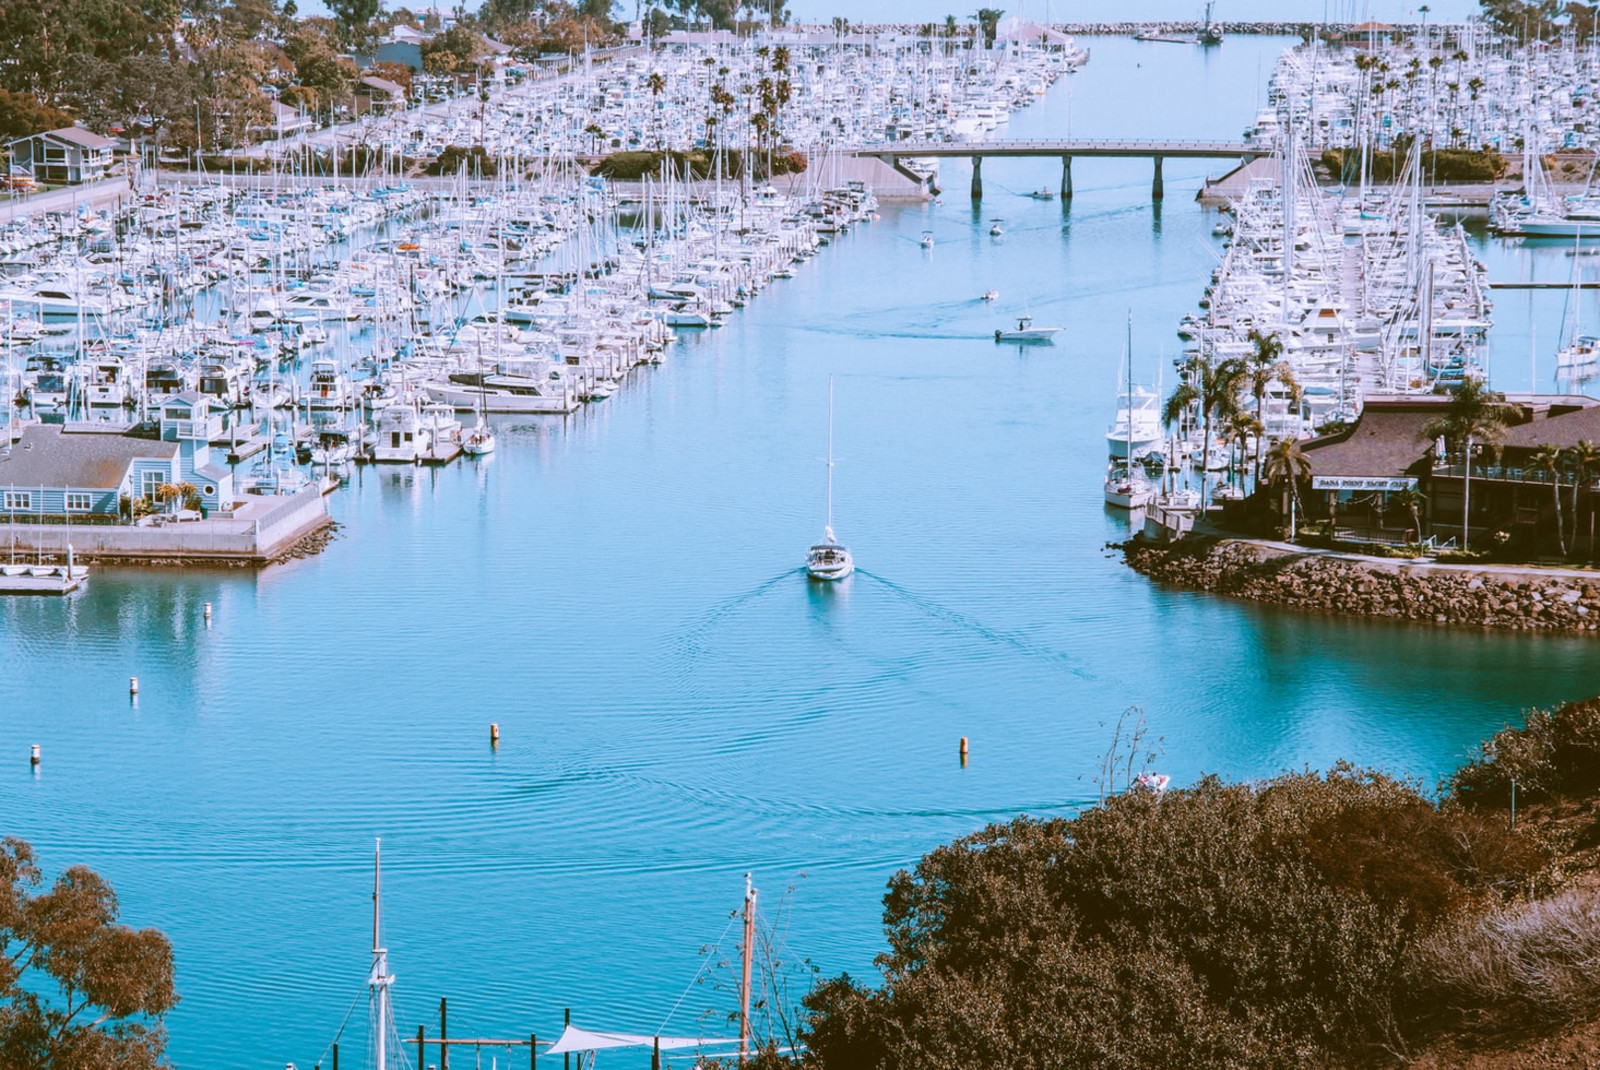 Dana Point Marina in California with sailboats lined on blue waters